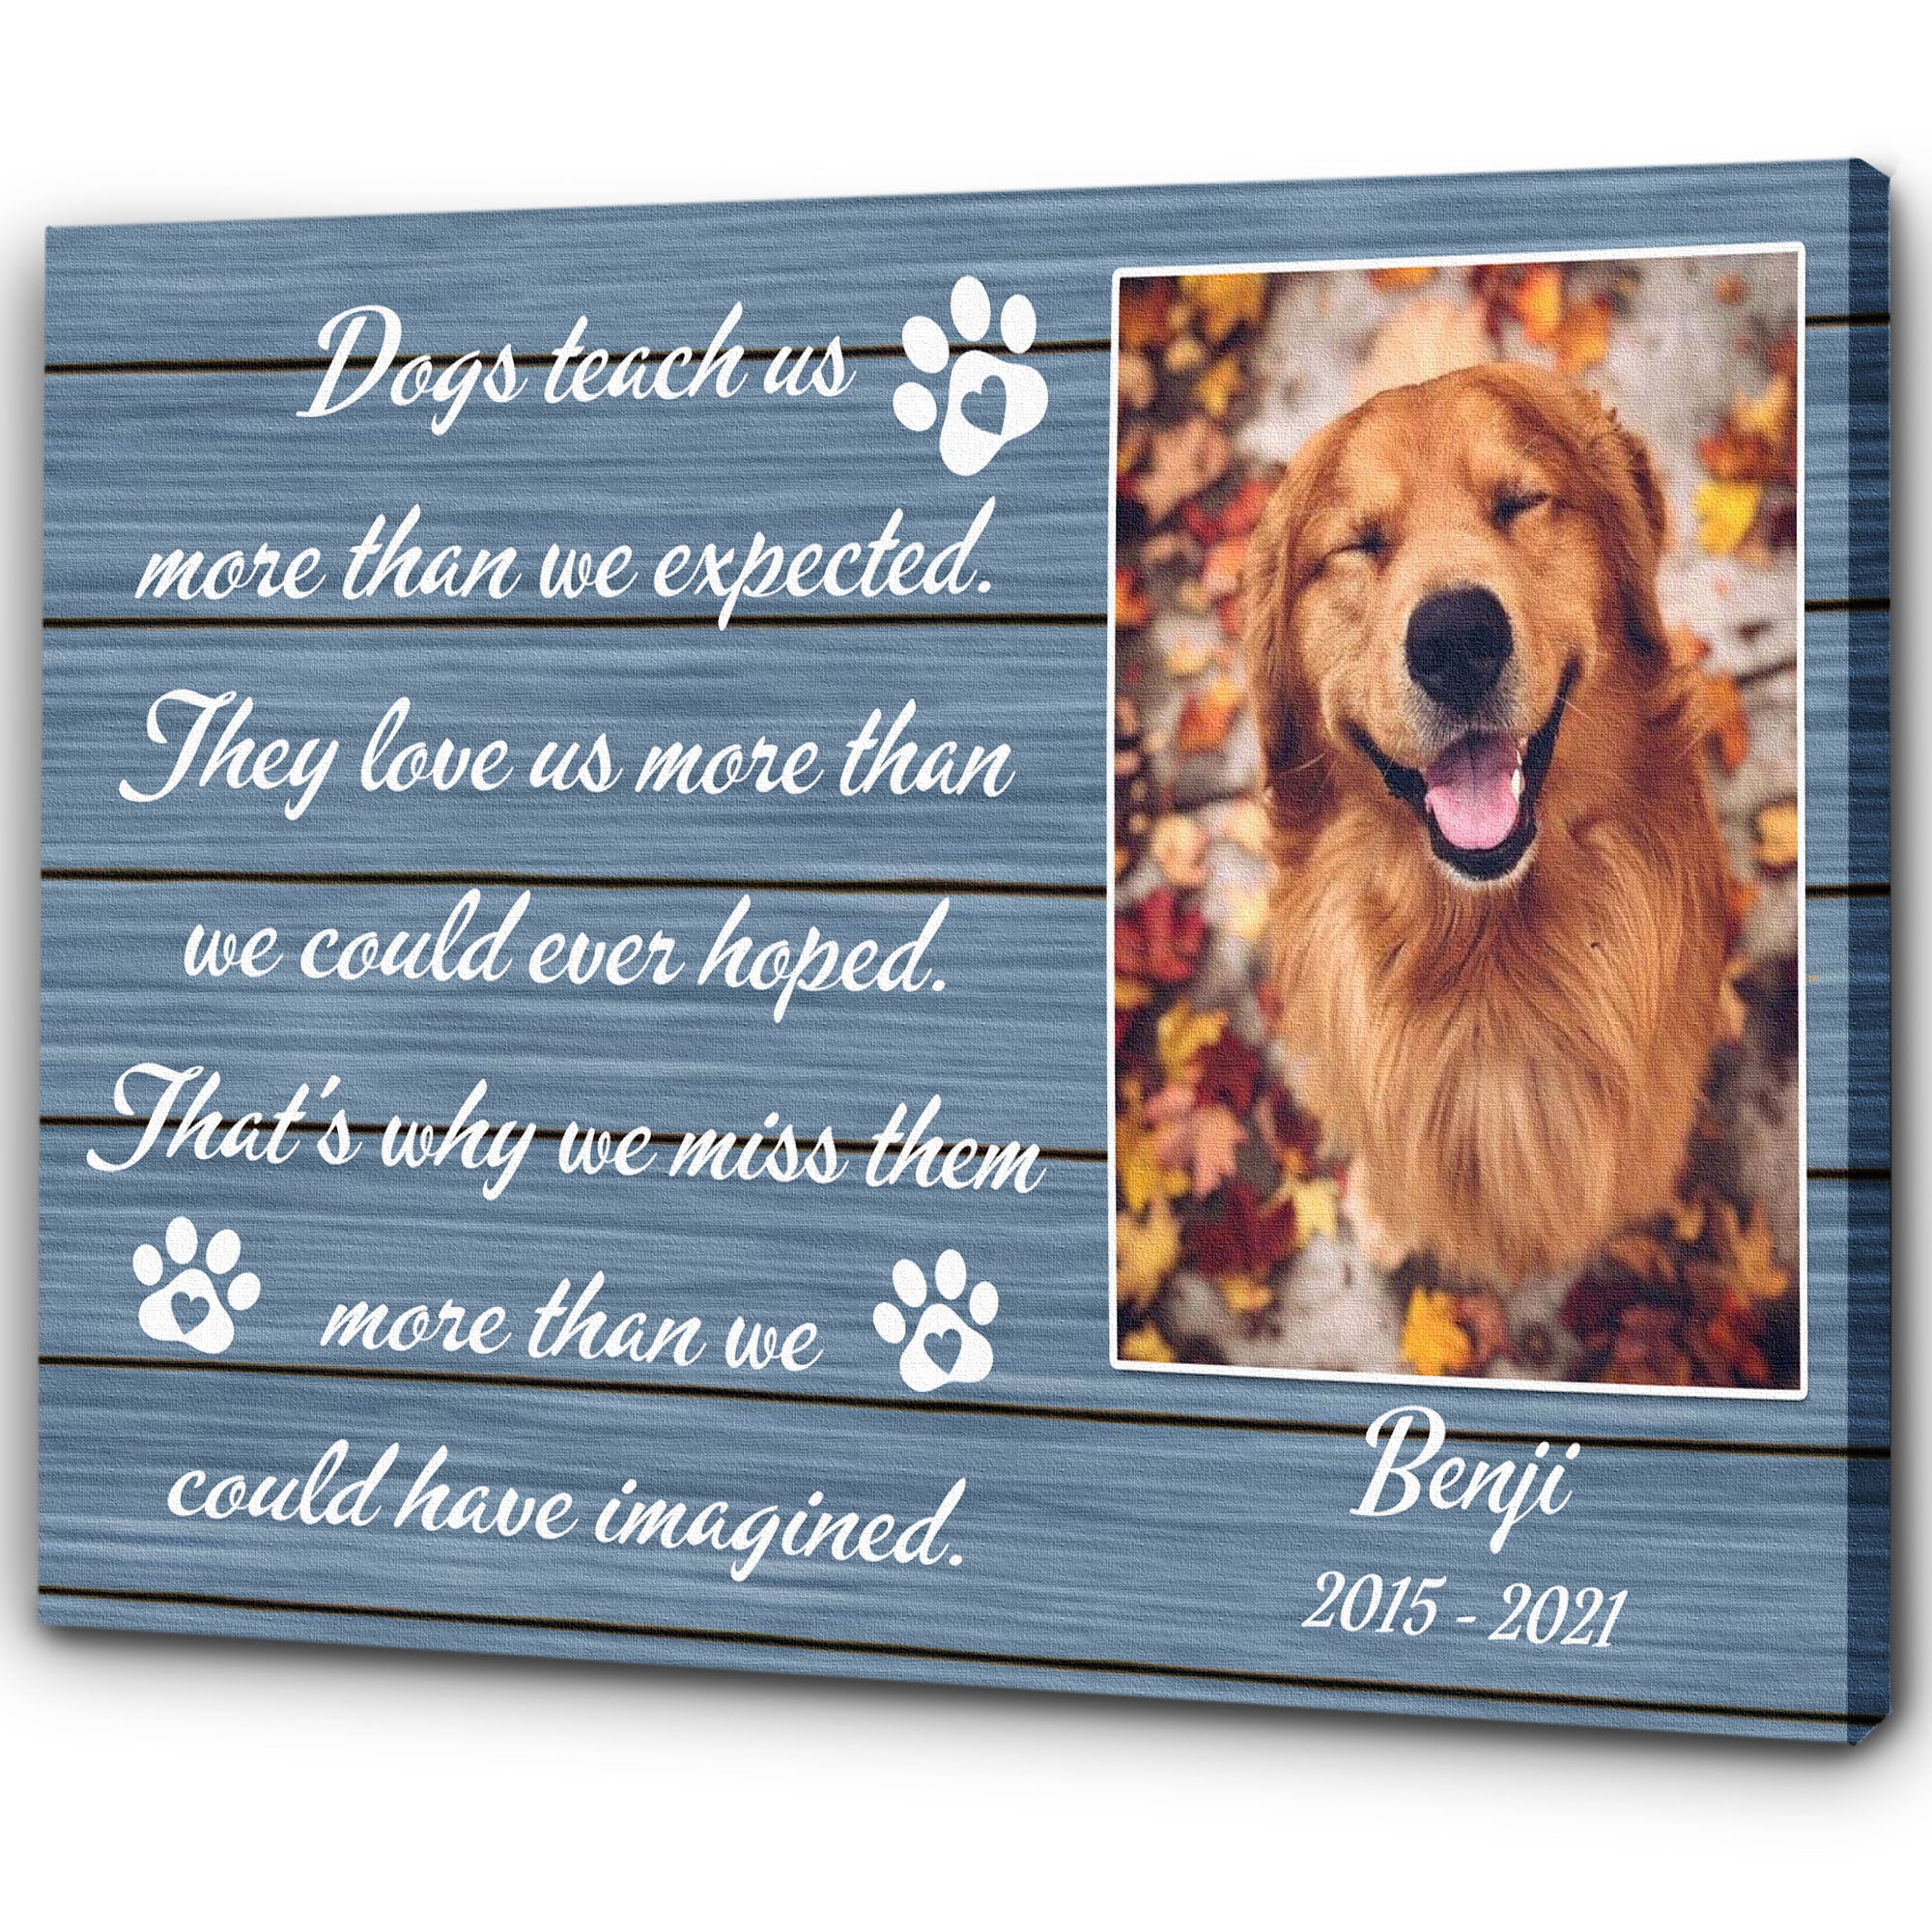 Personalized Canvas| Dog Loss Memorial| Dogs Teach Us More Than We Expected| Pet Remembrance, Loss of Dog Sympathy Gift for Dog Owners, Paw Friend| N1924 Myfihu